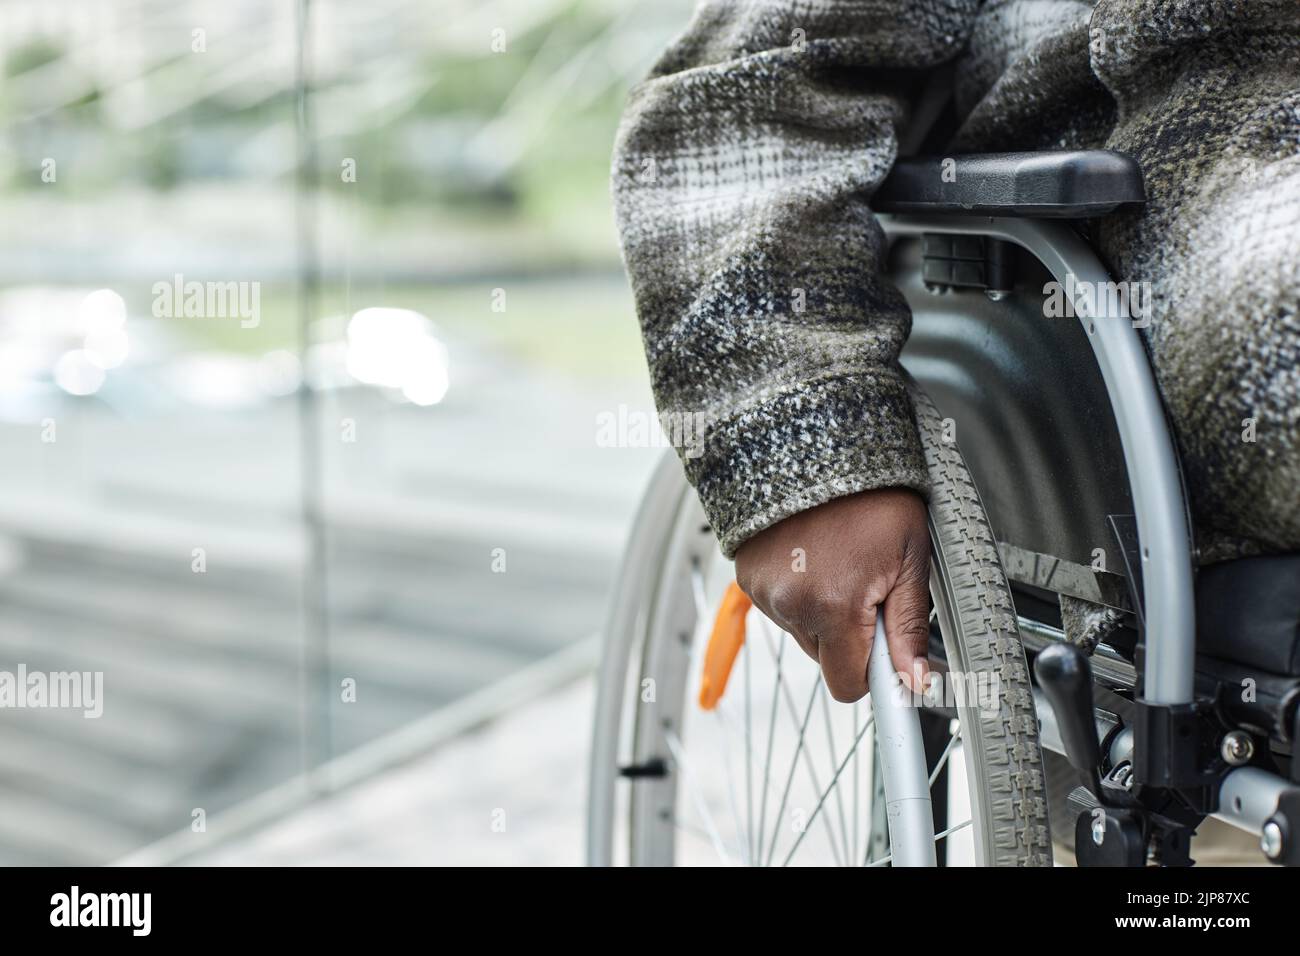 Closeup of unrecognizable black woman in wheelchair pushing wheel, copy space Stock Photo